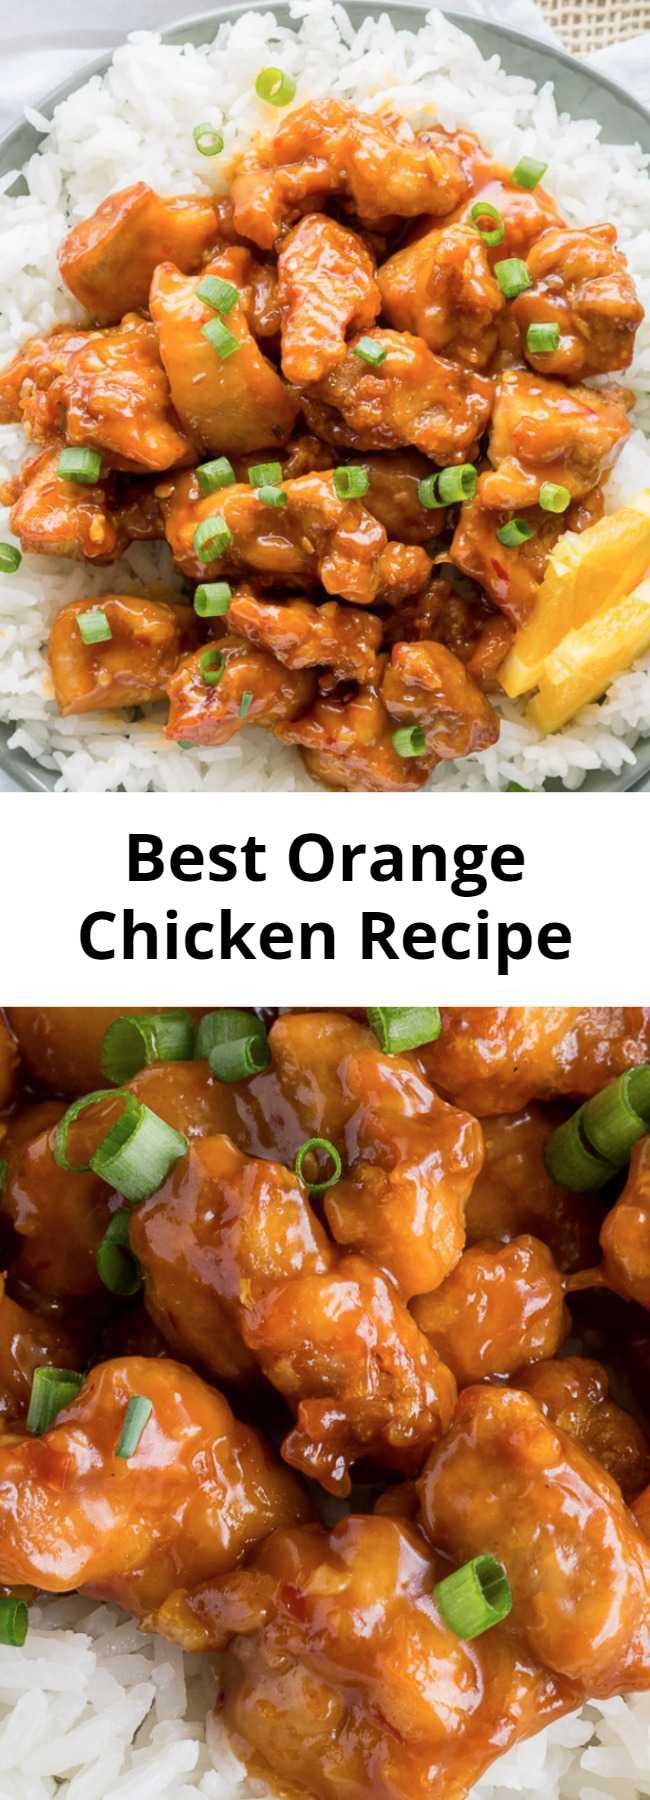 Best Orange Chicken Recipe - If you’re a fan of the famous Panda Express Orange Chicken, then this homemade version is going to bring a smile to your face. This is the BEST Orange Chicken Recipe on the internet!